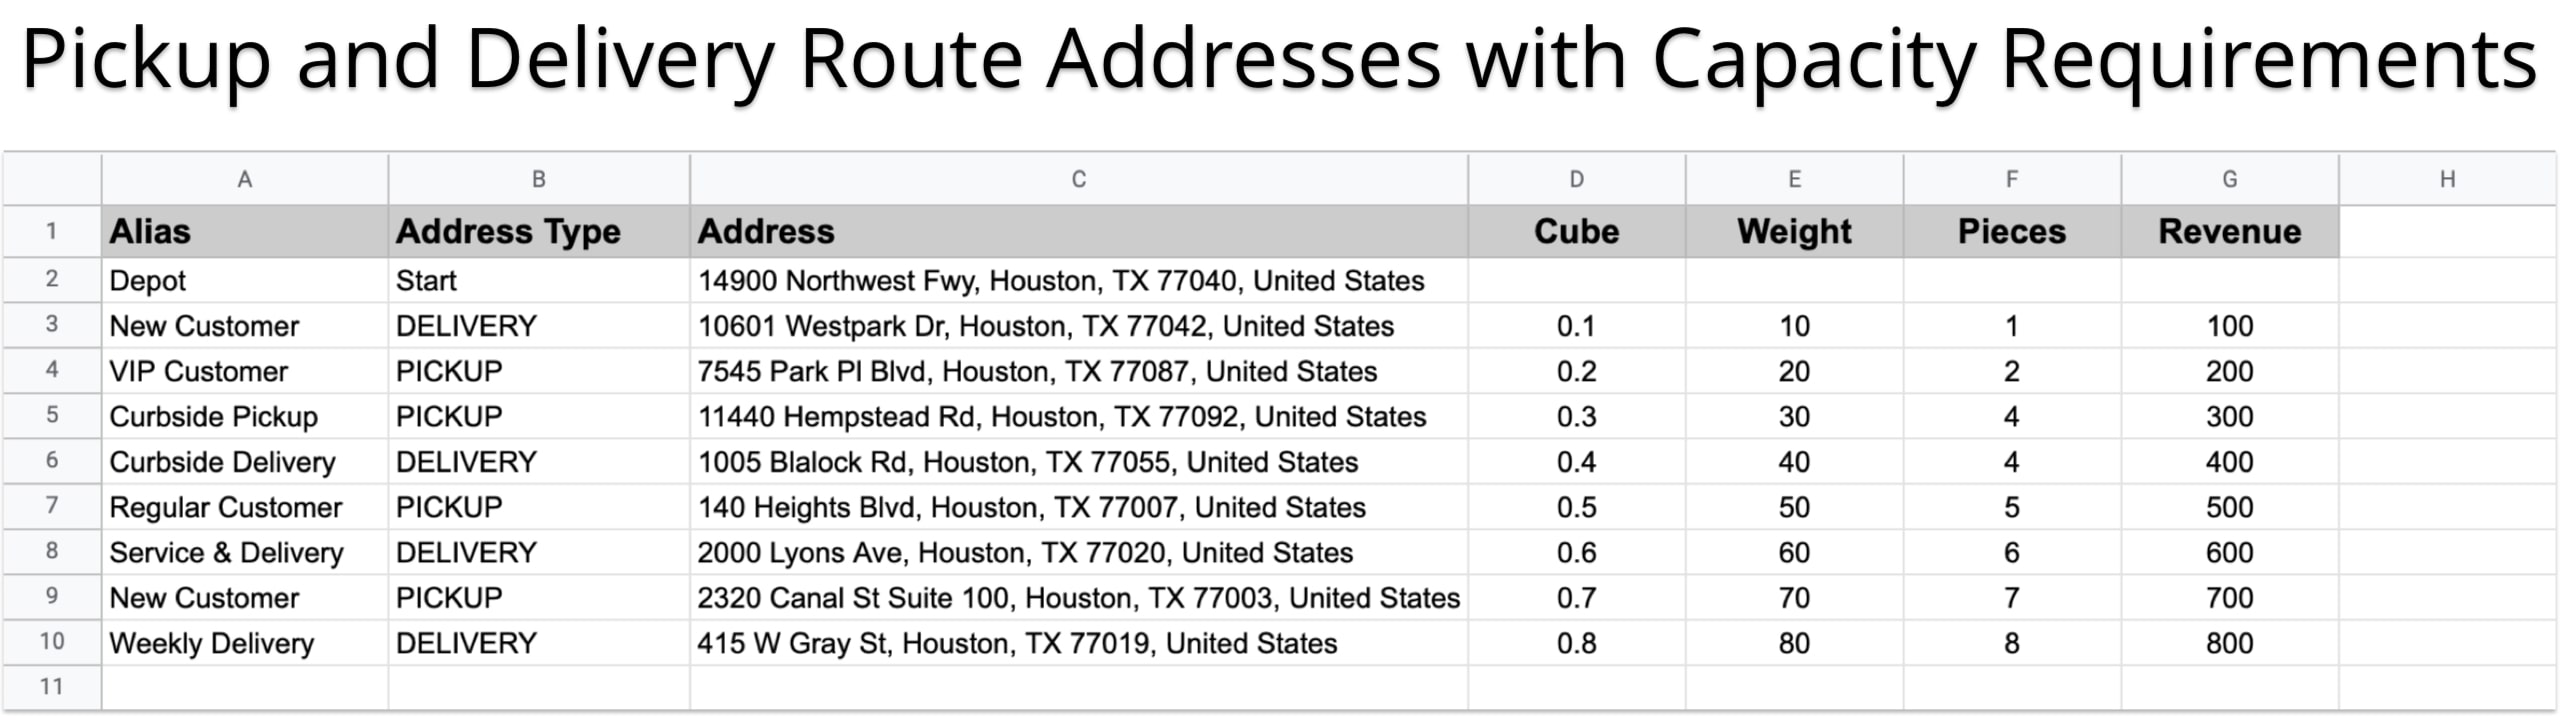 Import pickup and delivery addresses with cube, weight, and pieces vehicle capacity requirements.